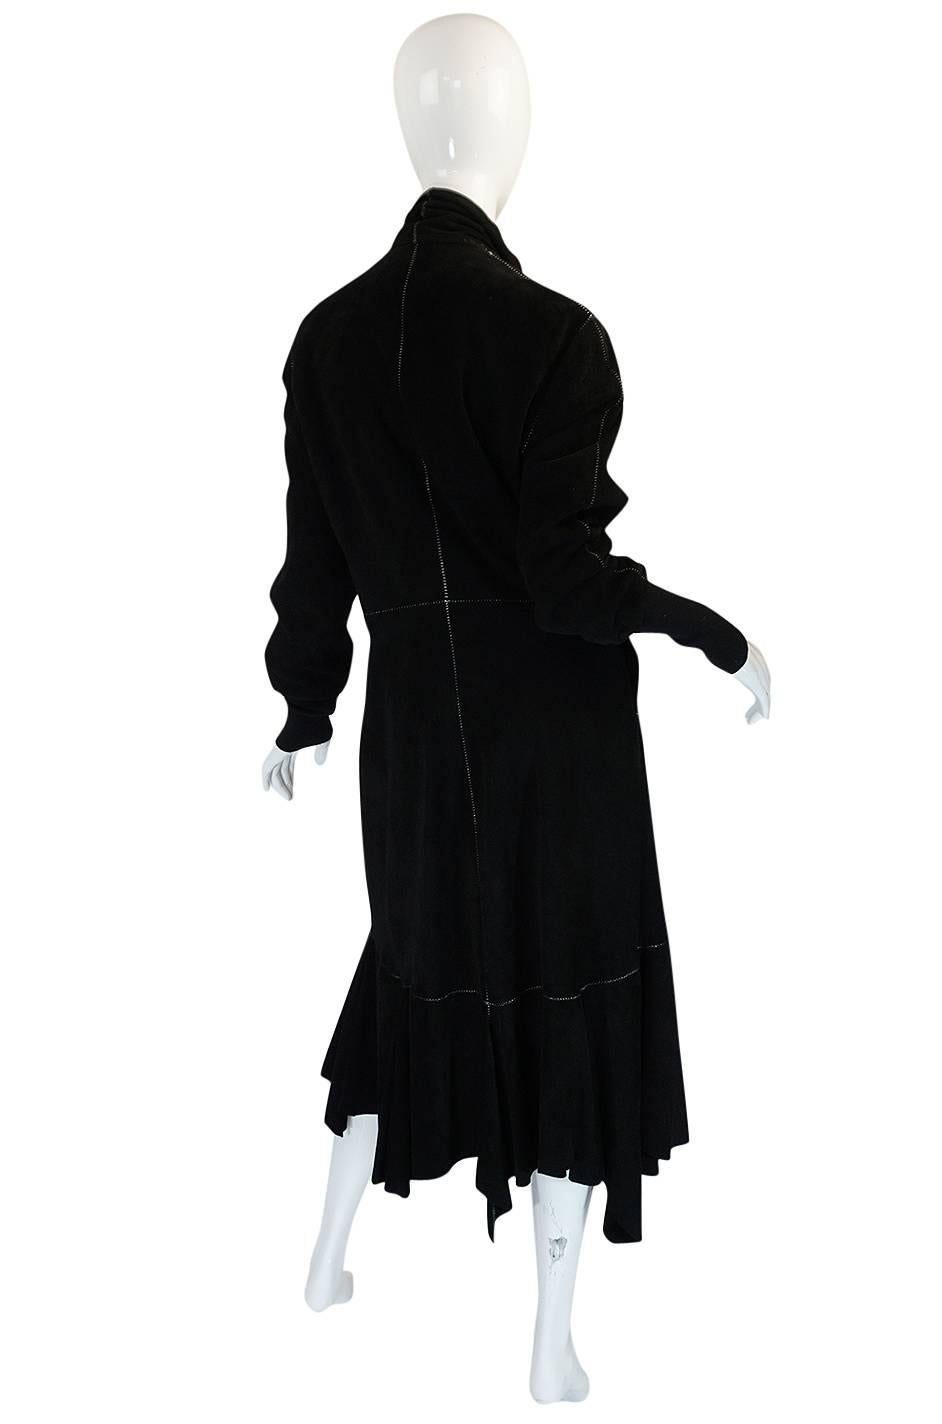 

This coat is just spectacular - the suede used is so light and butter sift that you could almost get away with wearing this as a dress. It certainly has the lines and styling of one. It is a wrap coat and I love that the ties are a contrasting